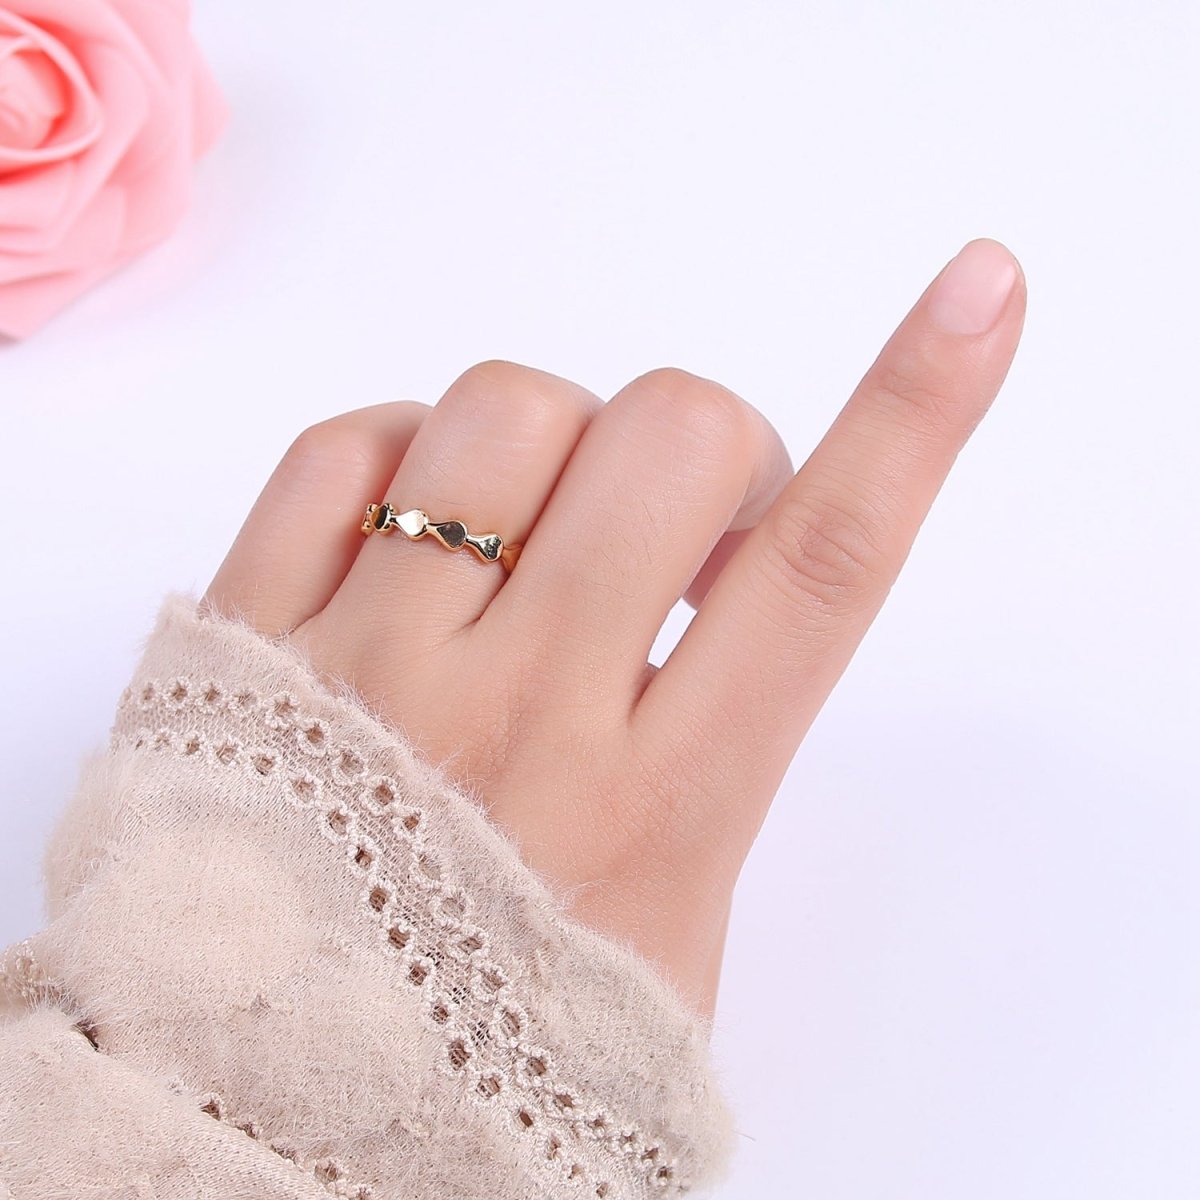 Minimalist Geometric Abstract Stacking Ring, 16K Gold Filled Oval Shaped Ring, Gold Statement Adjustable Ring U-430 Y-594 - DLUXCA